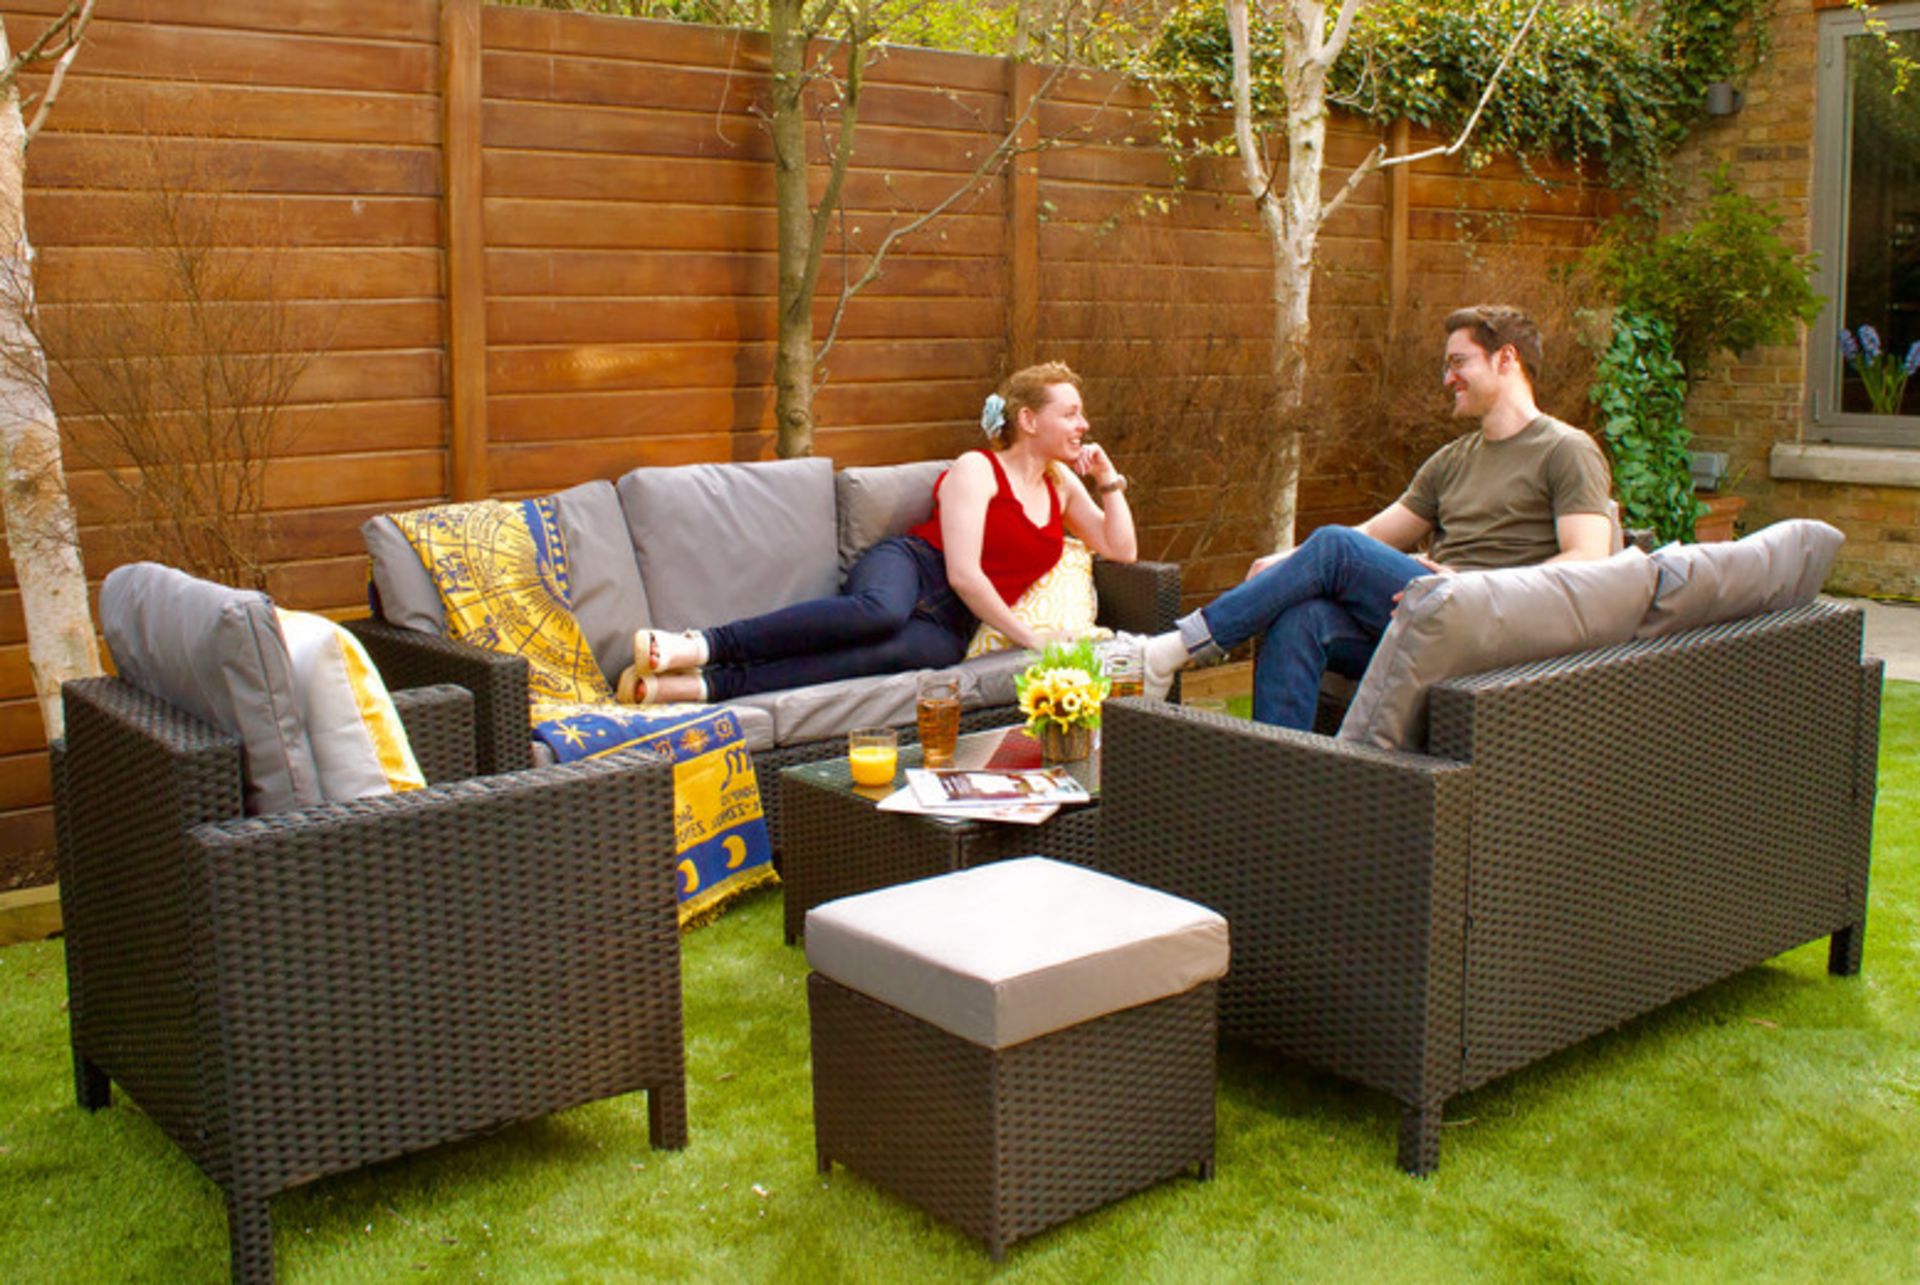 FREE DELIVERY - 8-SEATER RATTAN CHAIR & SOFA GARDEN FURNITURE SET - BLACK